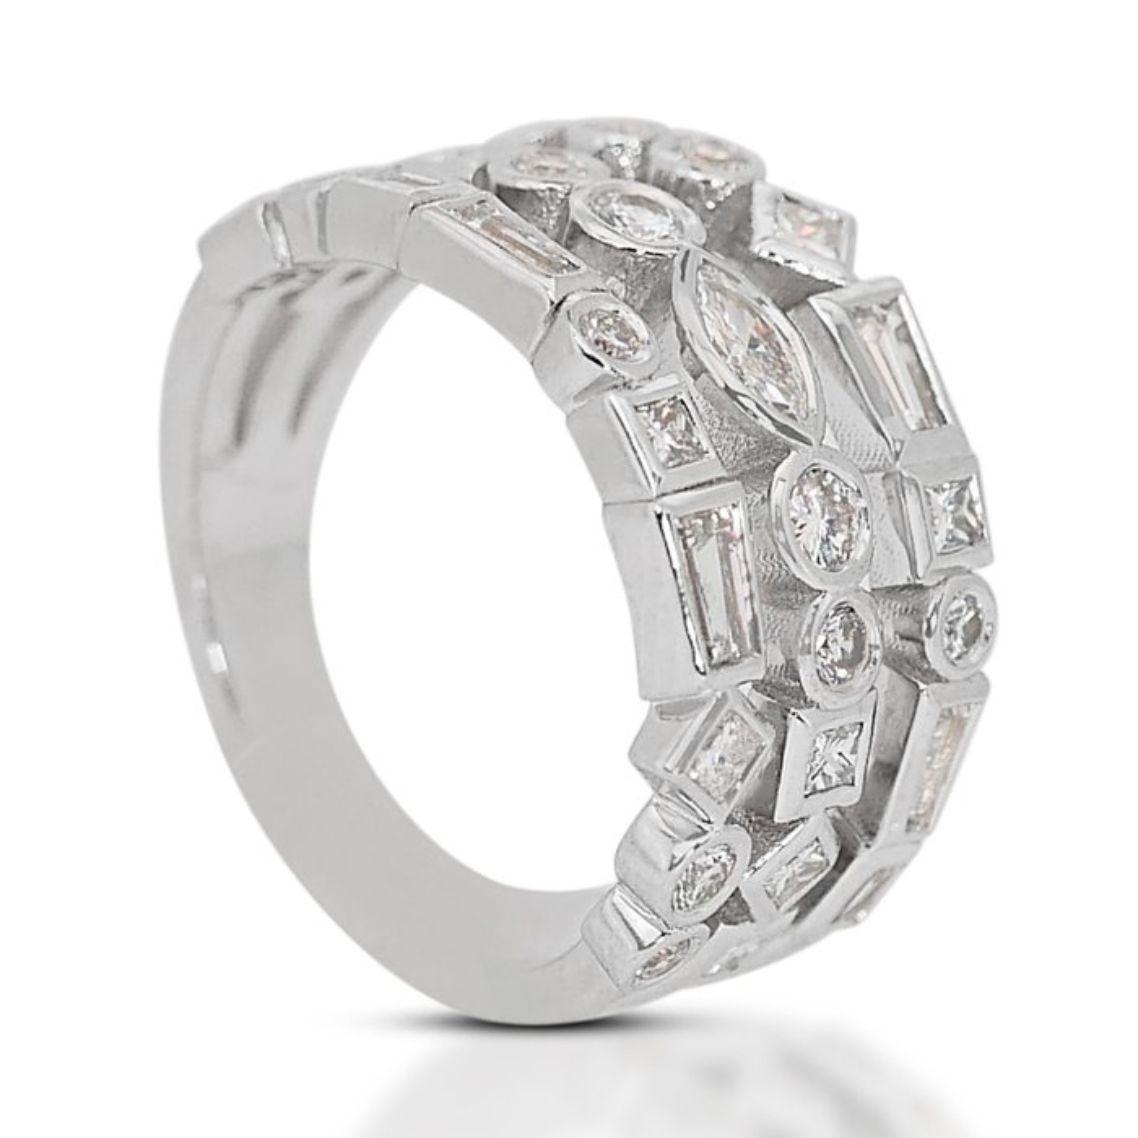 Intricate 1.16ct Diamond Ring in 18K White Gold  For Sale 1